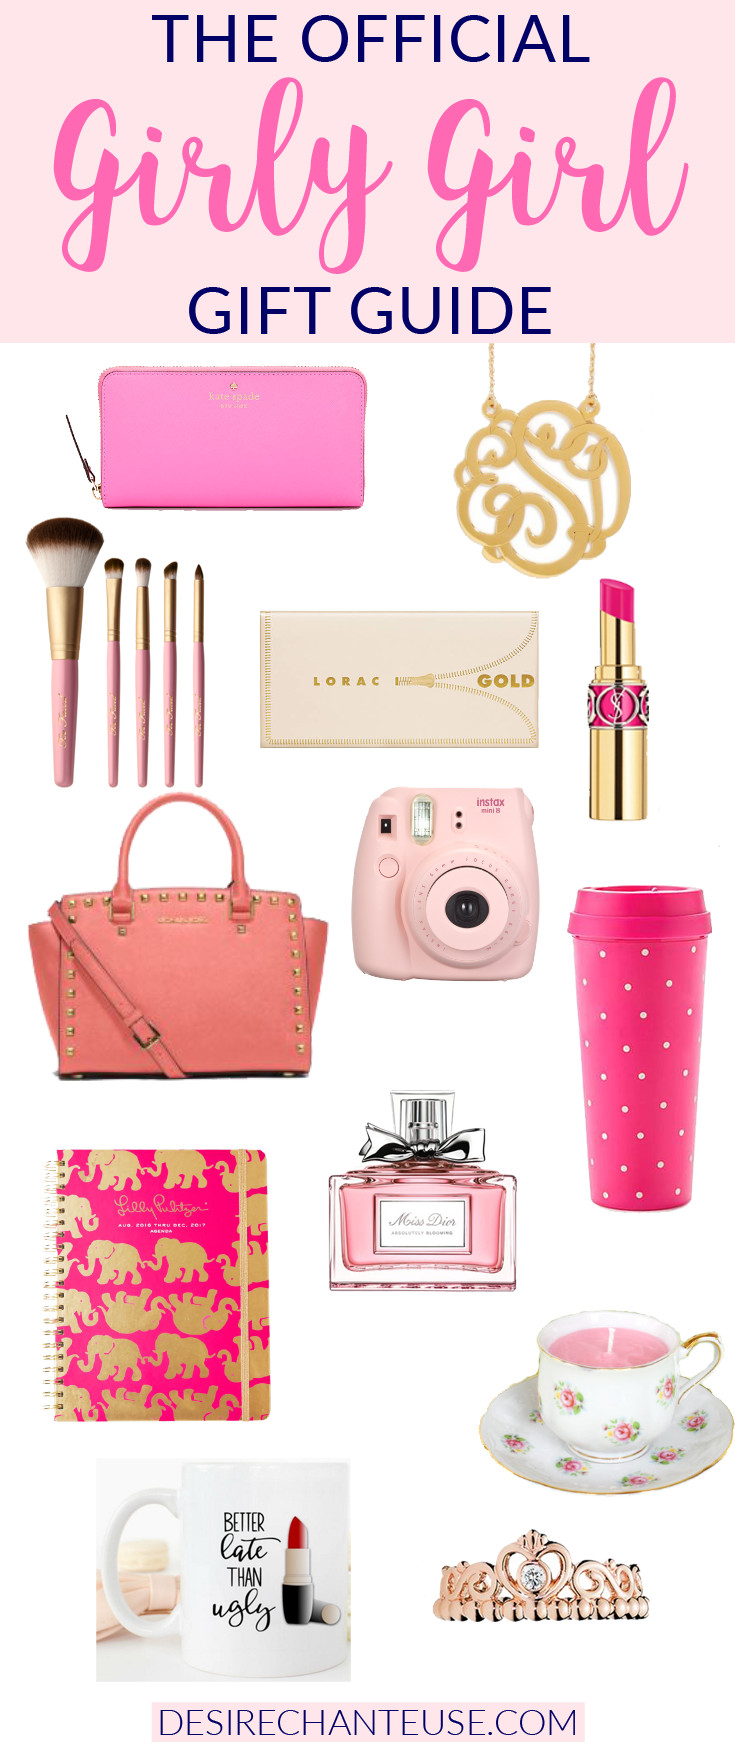 Teenage Gift Ideas For Girls
 Pin on Desire s Blog Posts